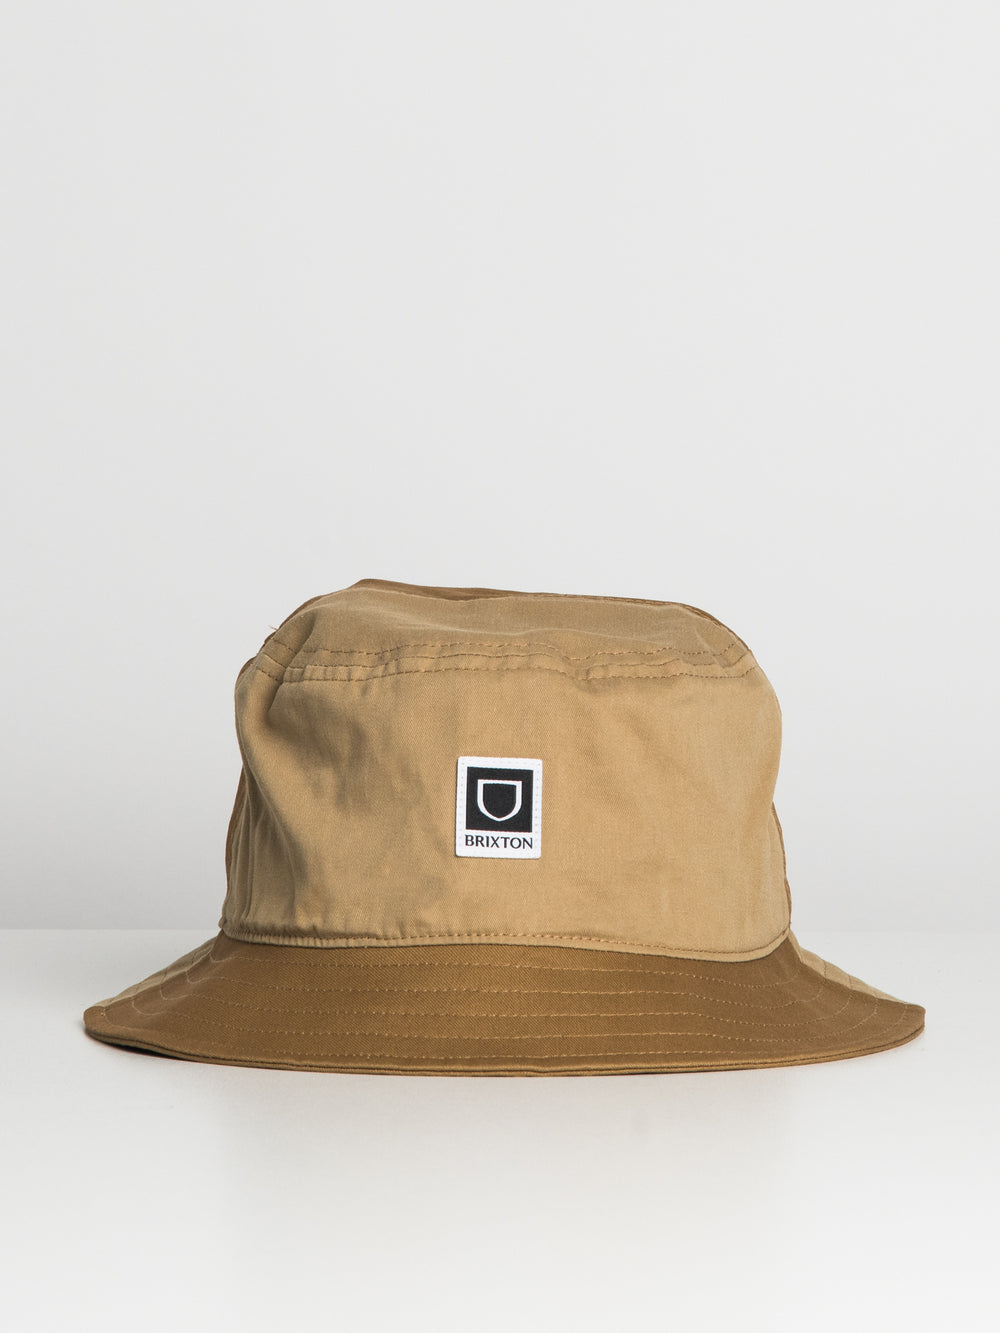 BRIXTON BETA PACKABLE BUCKET HAT - CLEARANCE